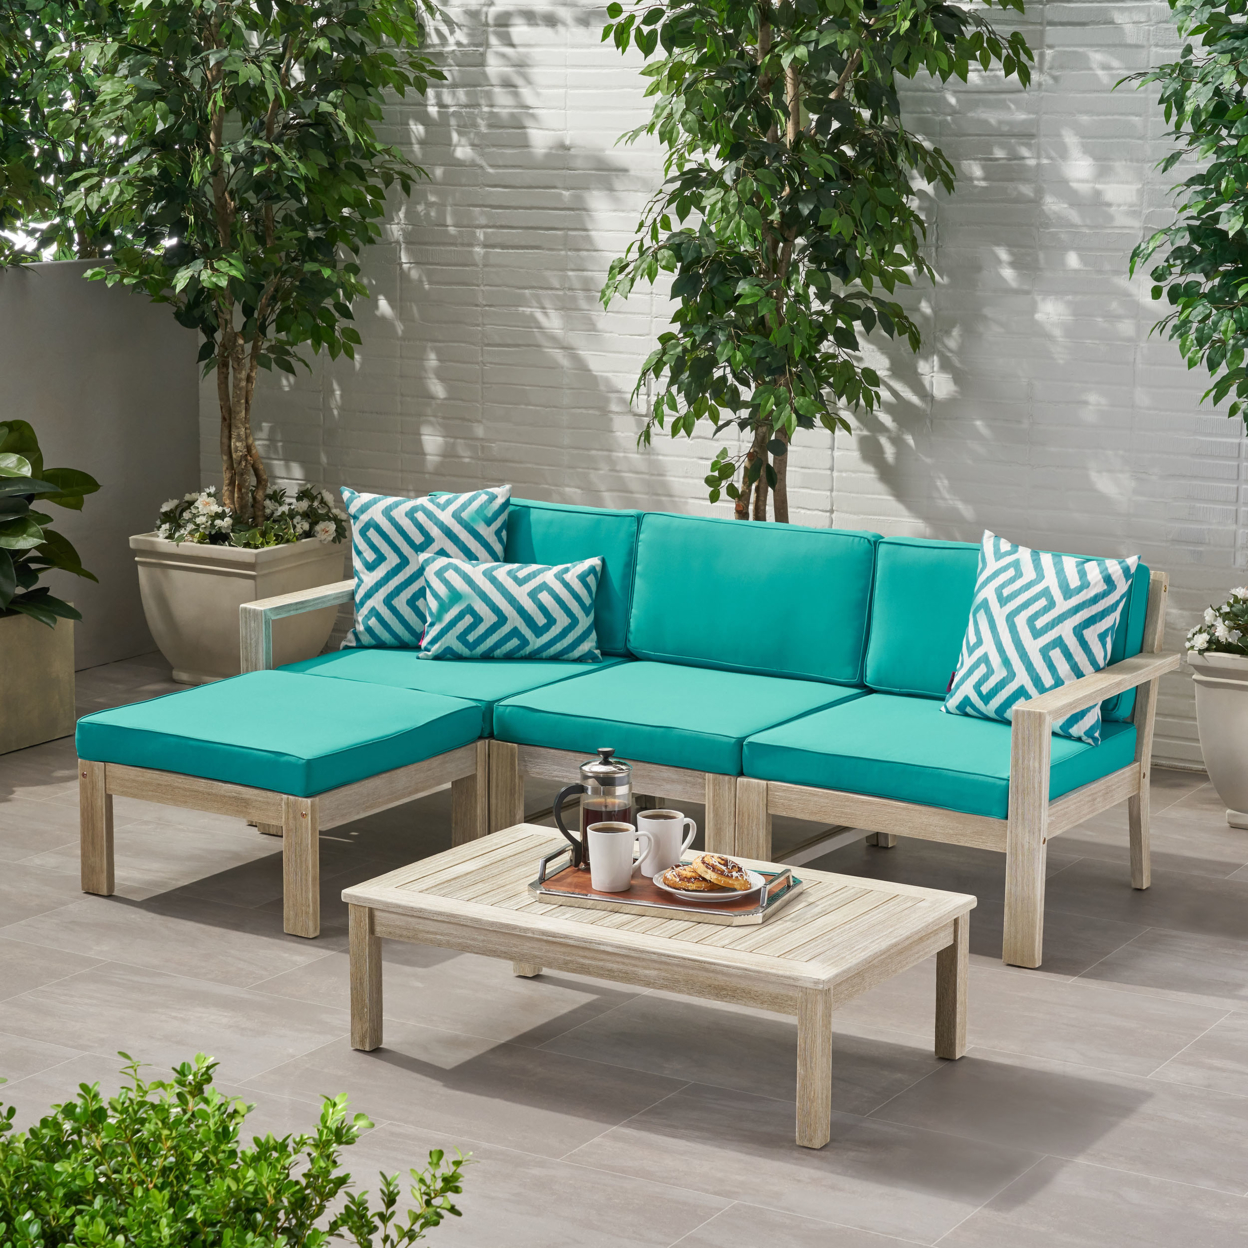 Isabella Ana Outdoor 3 Seater Acacia Wood Sofa Sectional With Cushions - Wire Brushed Light Gray Wash + Teal